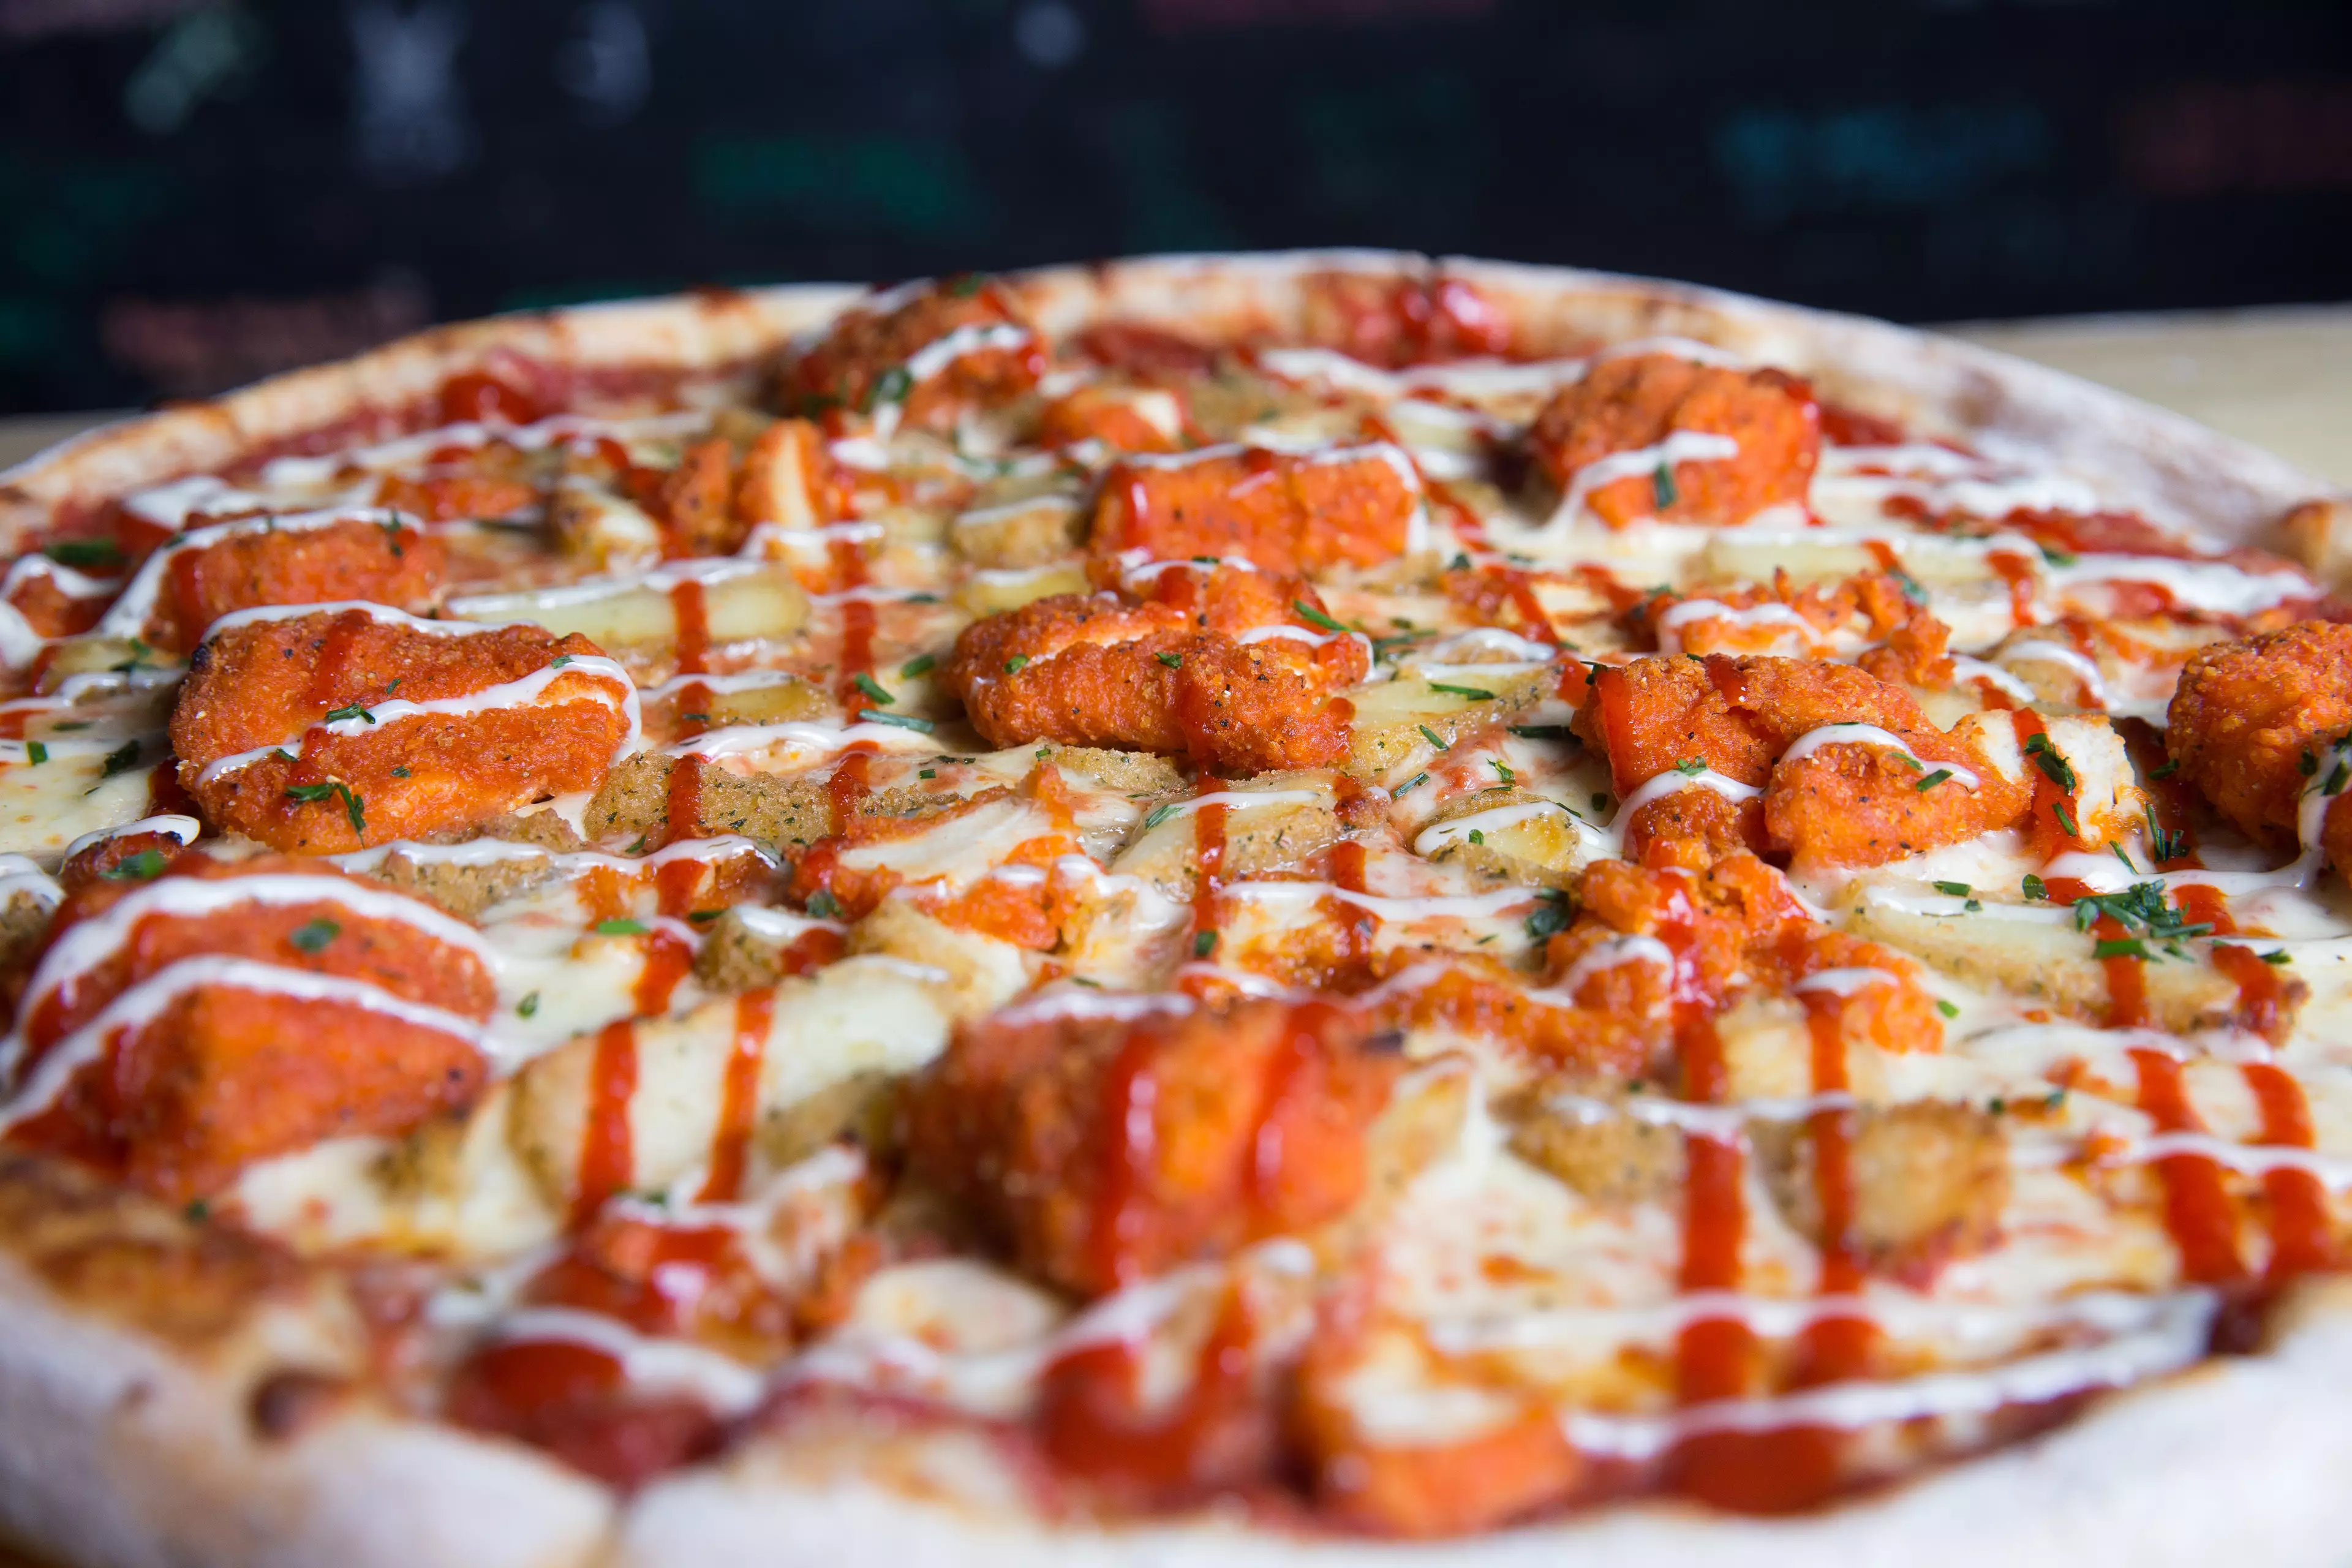 The fiery nugget-topped pizza costs £10 and is available throughout January (